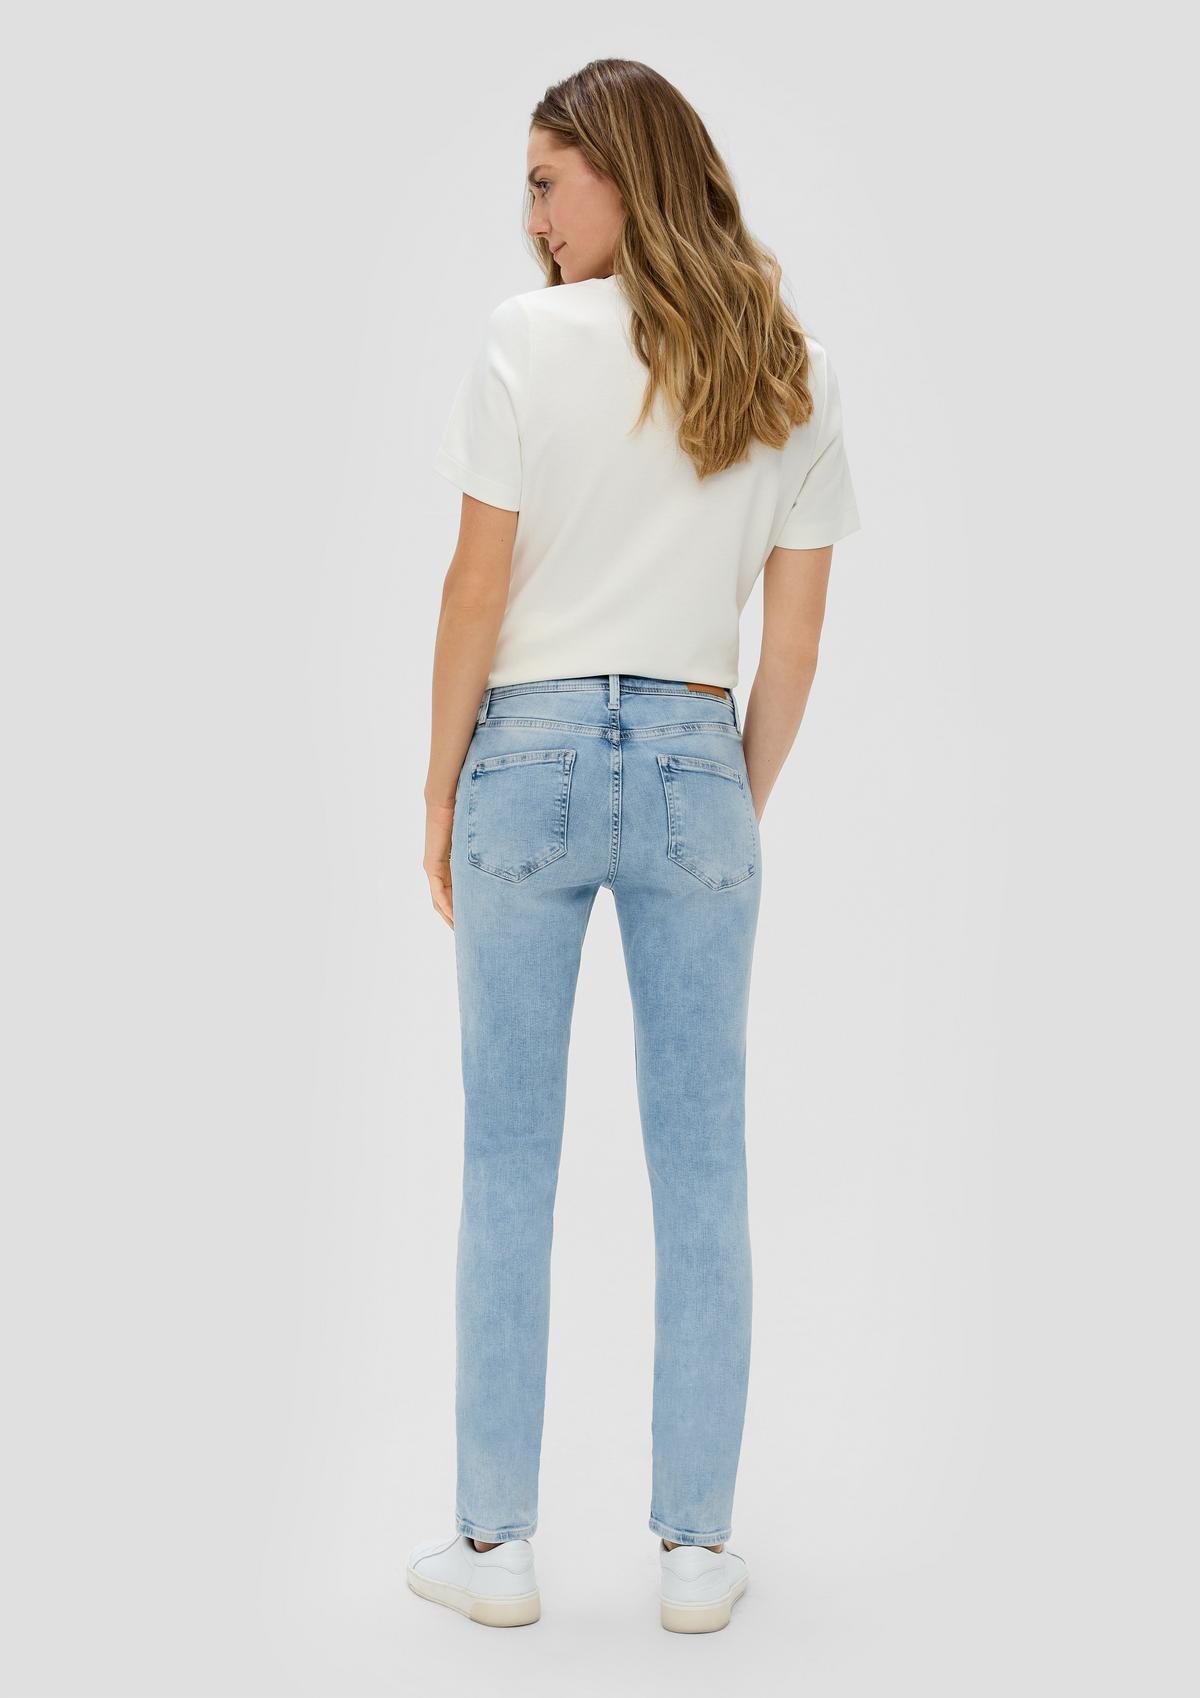 s.Oliver Betsy jeans / slim fit / mid rise / slim leg / stretch cotton